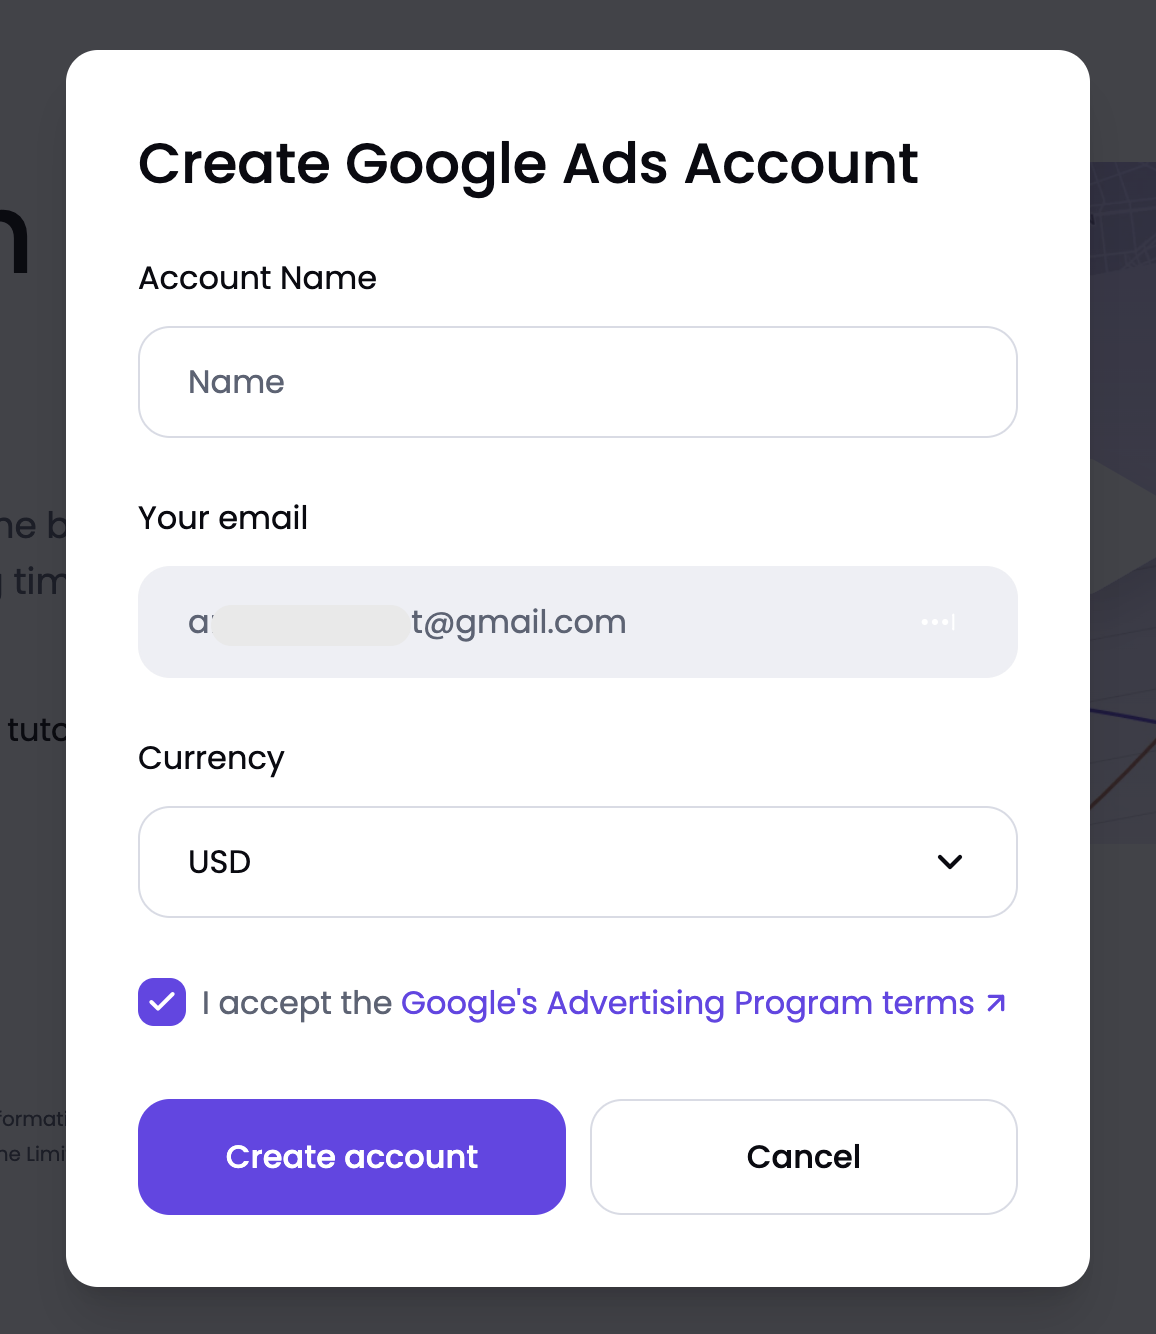 Creation of your new Google Ads account is a short, but crucial step.